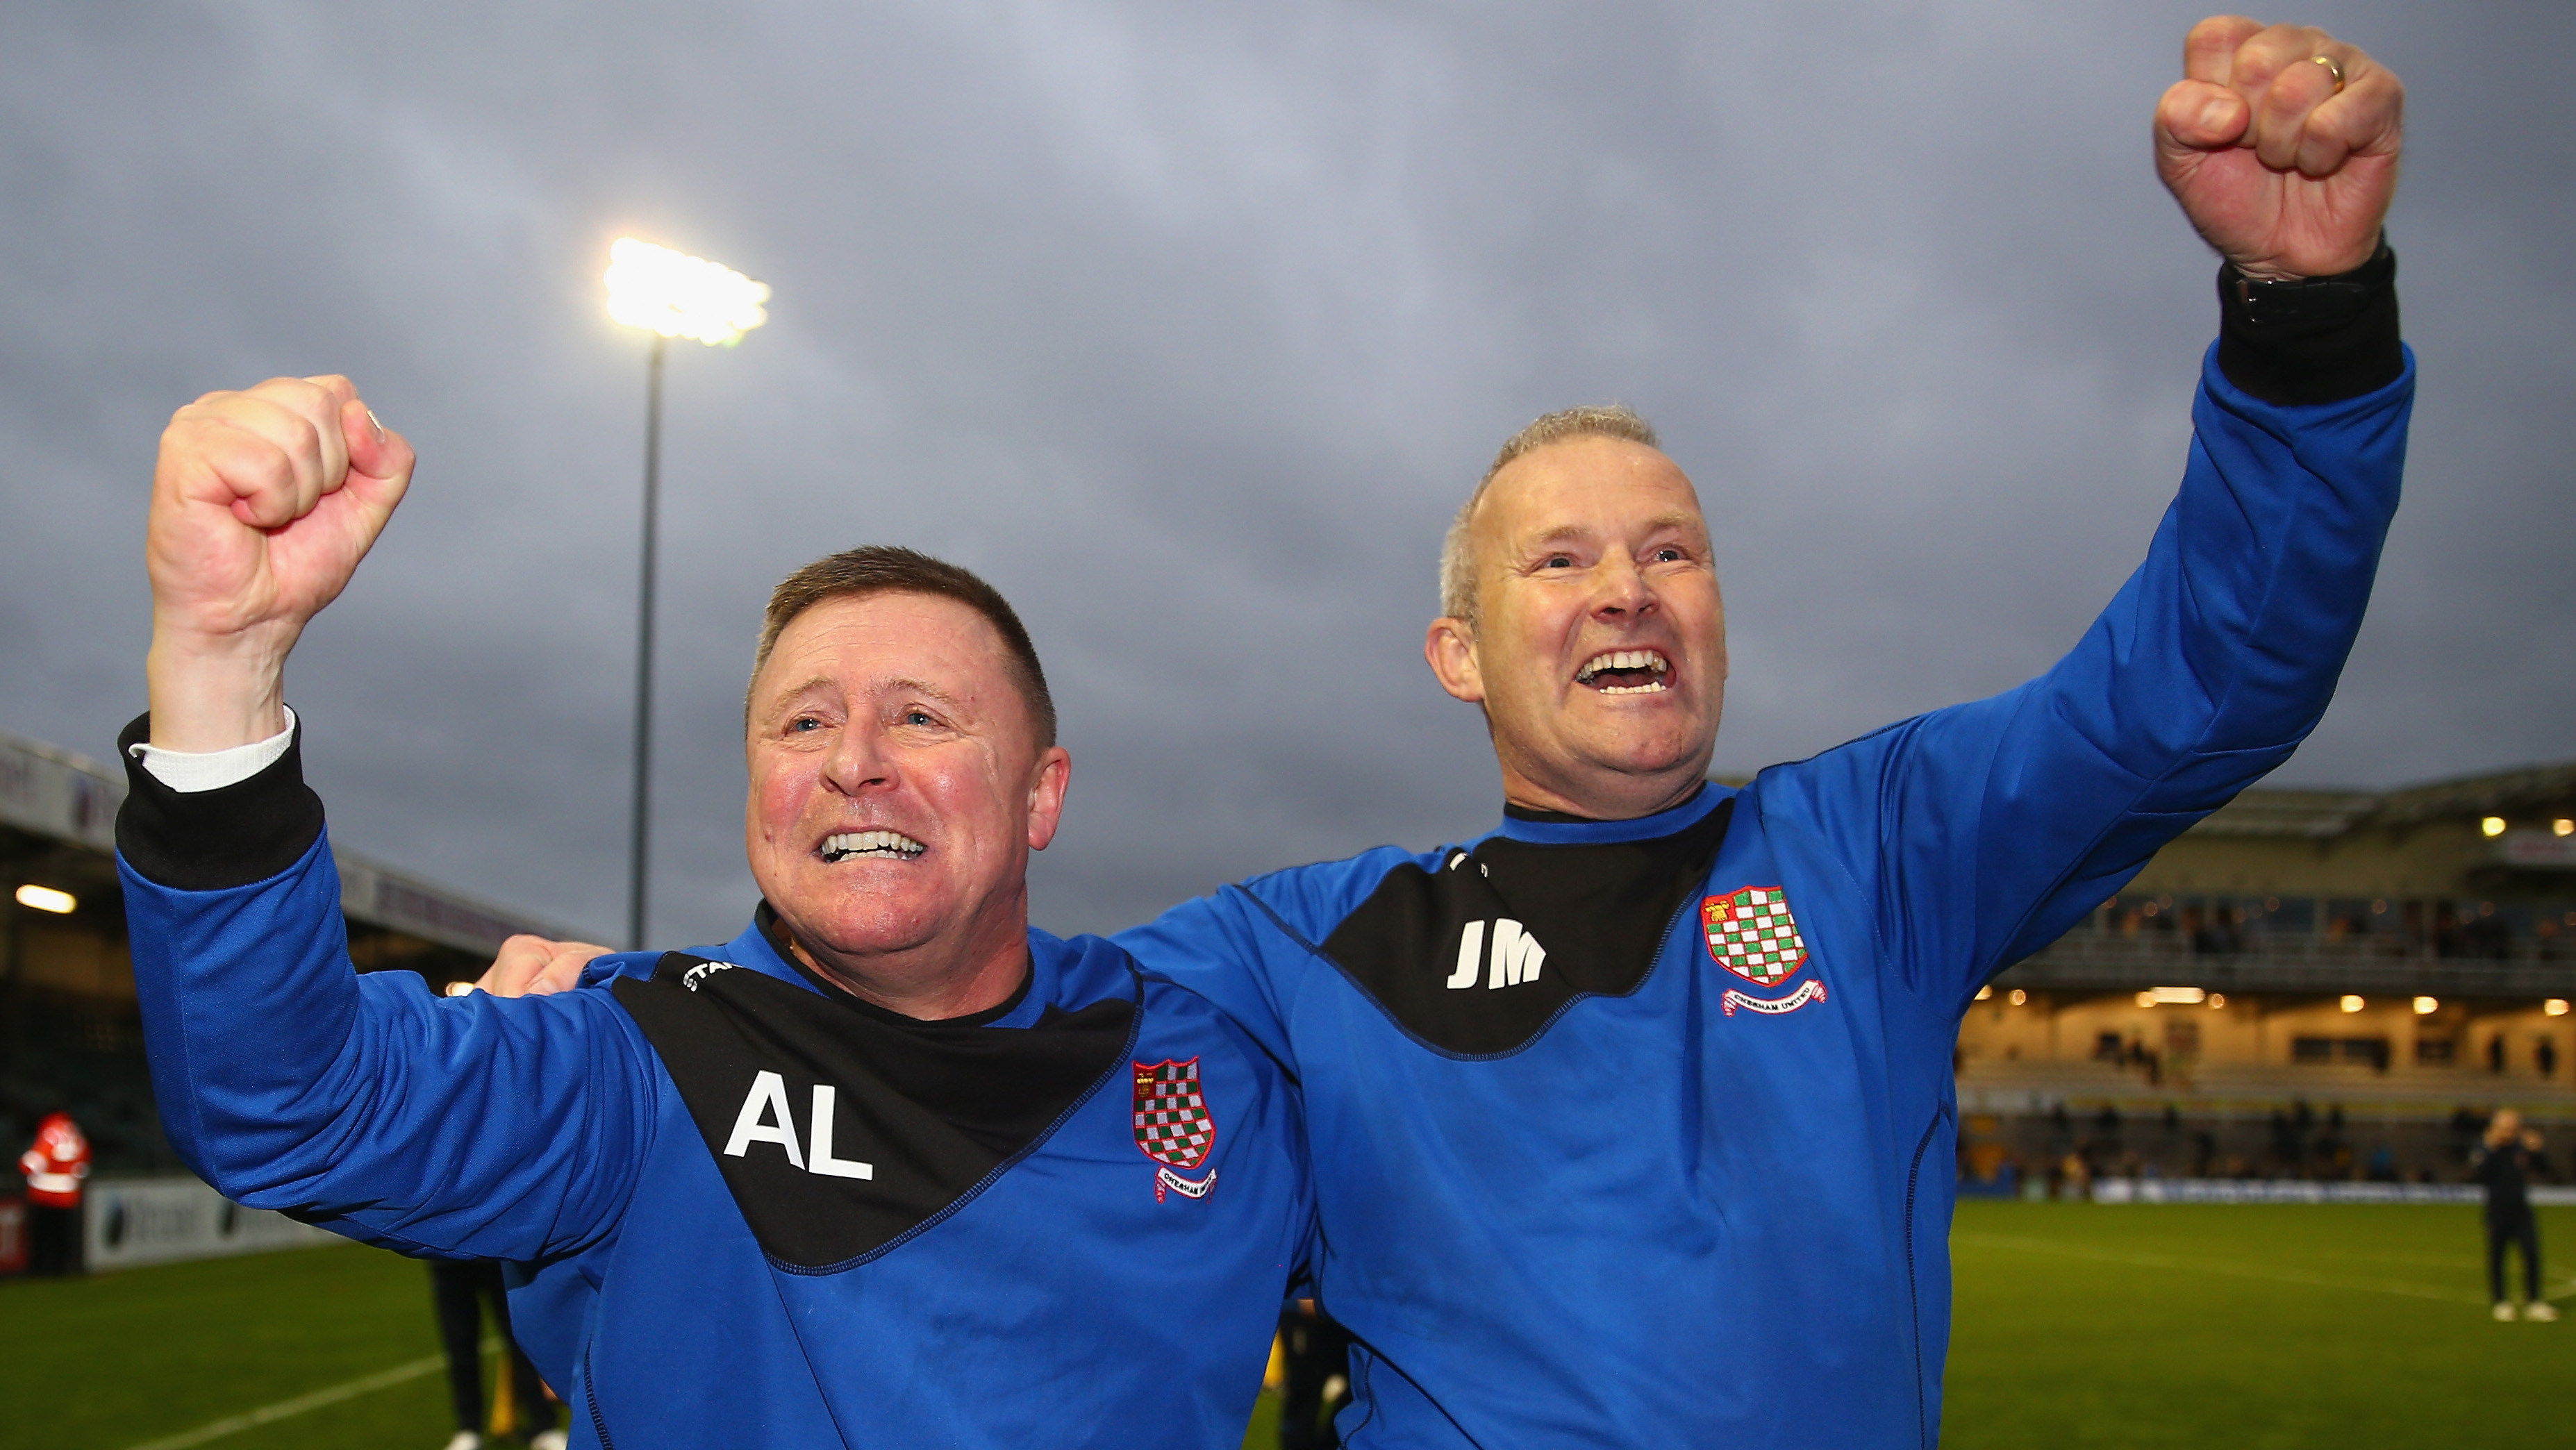 Chesham boss Andy Leese and his assistant manager Jon Meakes after their historic victory